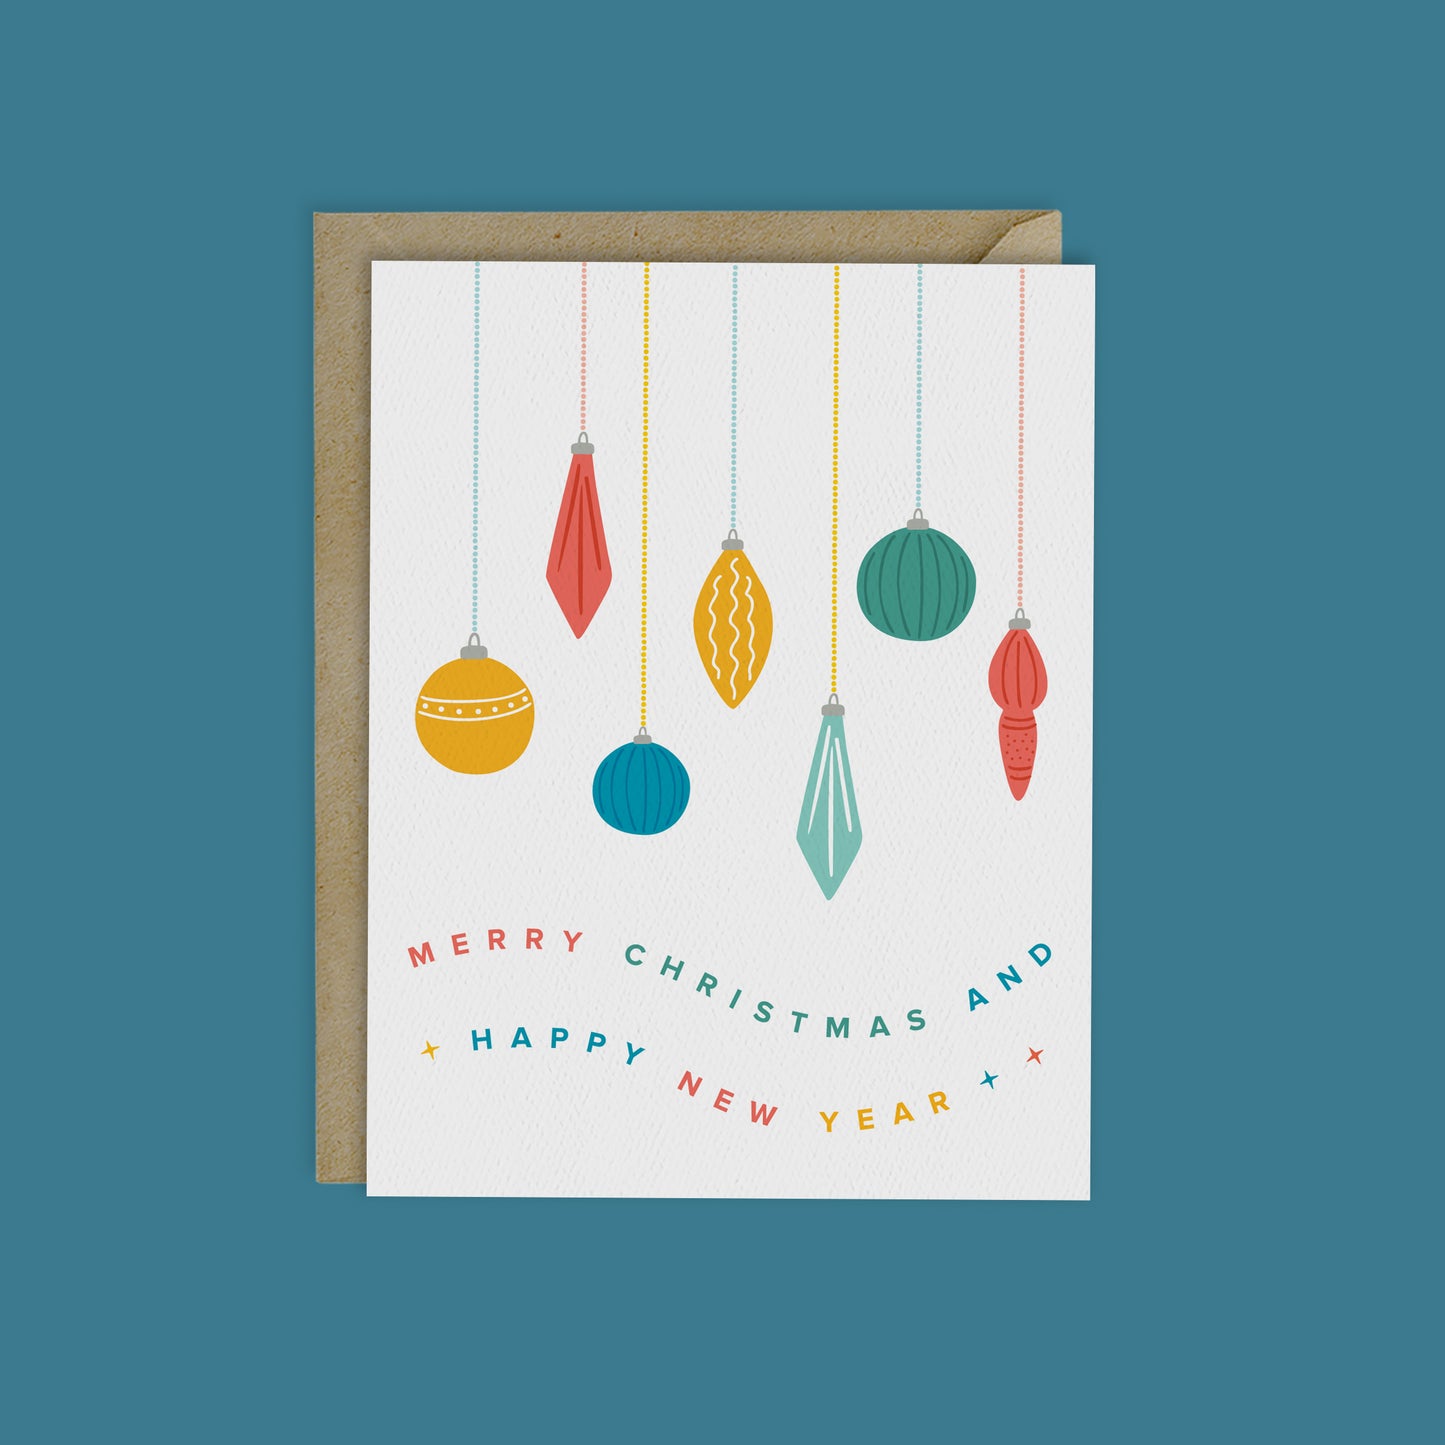 COLORFUL FESTIVE ORNAMENTS-MERRY CHRISTMAS AND HAPPY NEW YEAR CARD